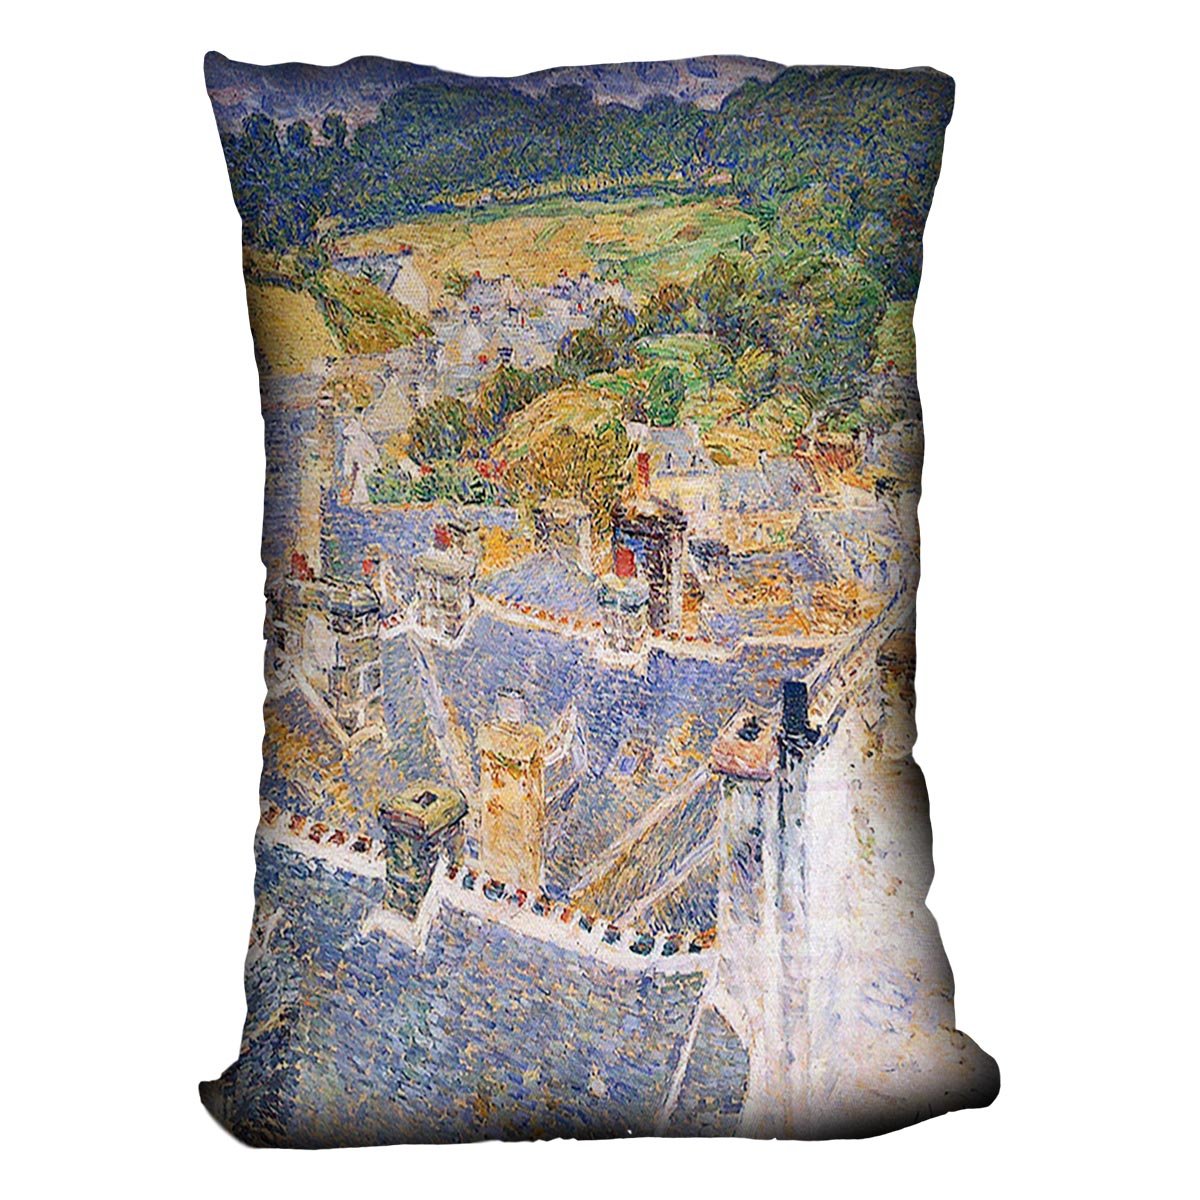 Roofs Pont-Aven by Hassam Cushion - Canvas Art Rocks - 4